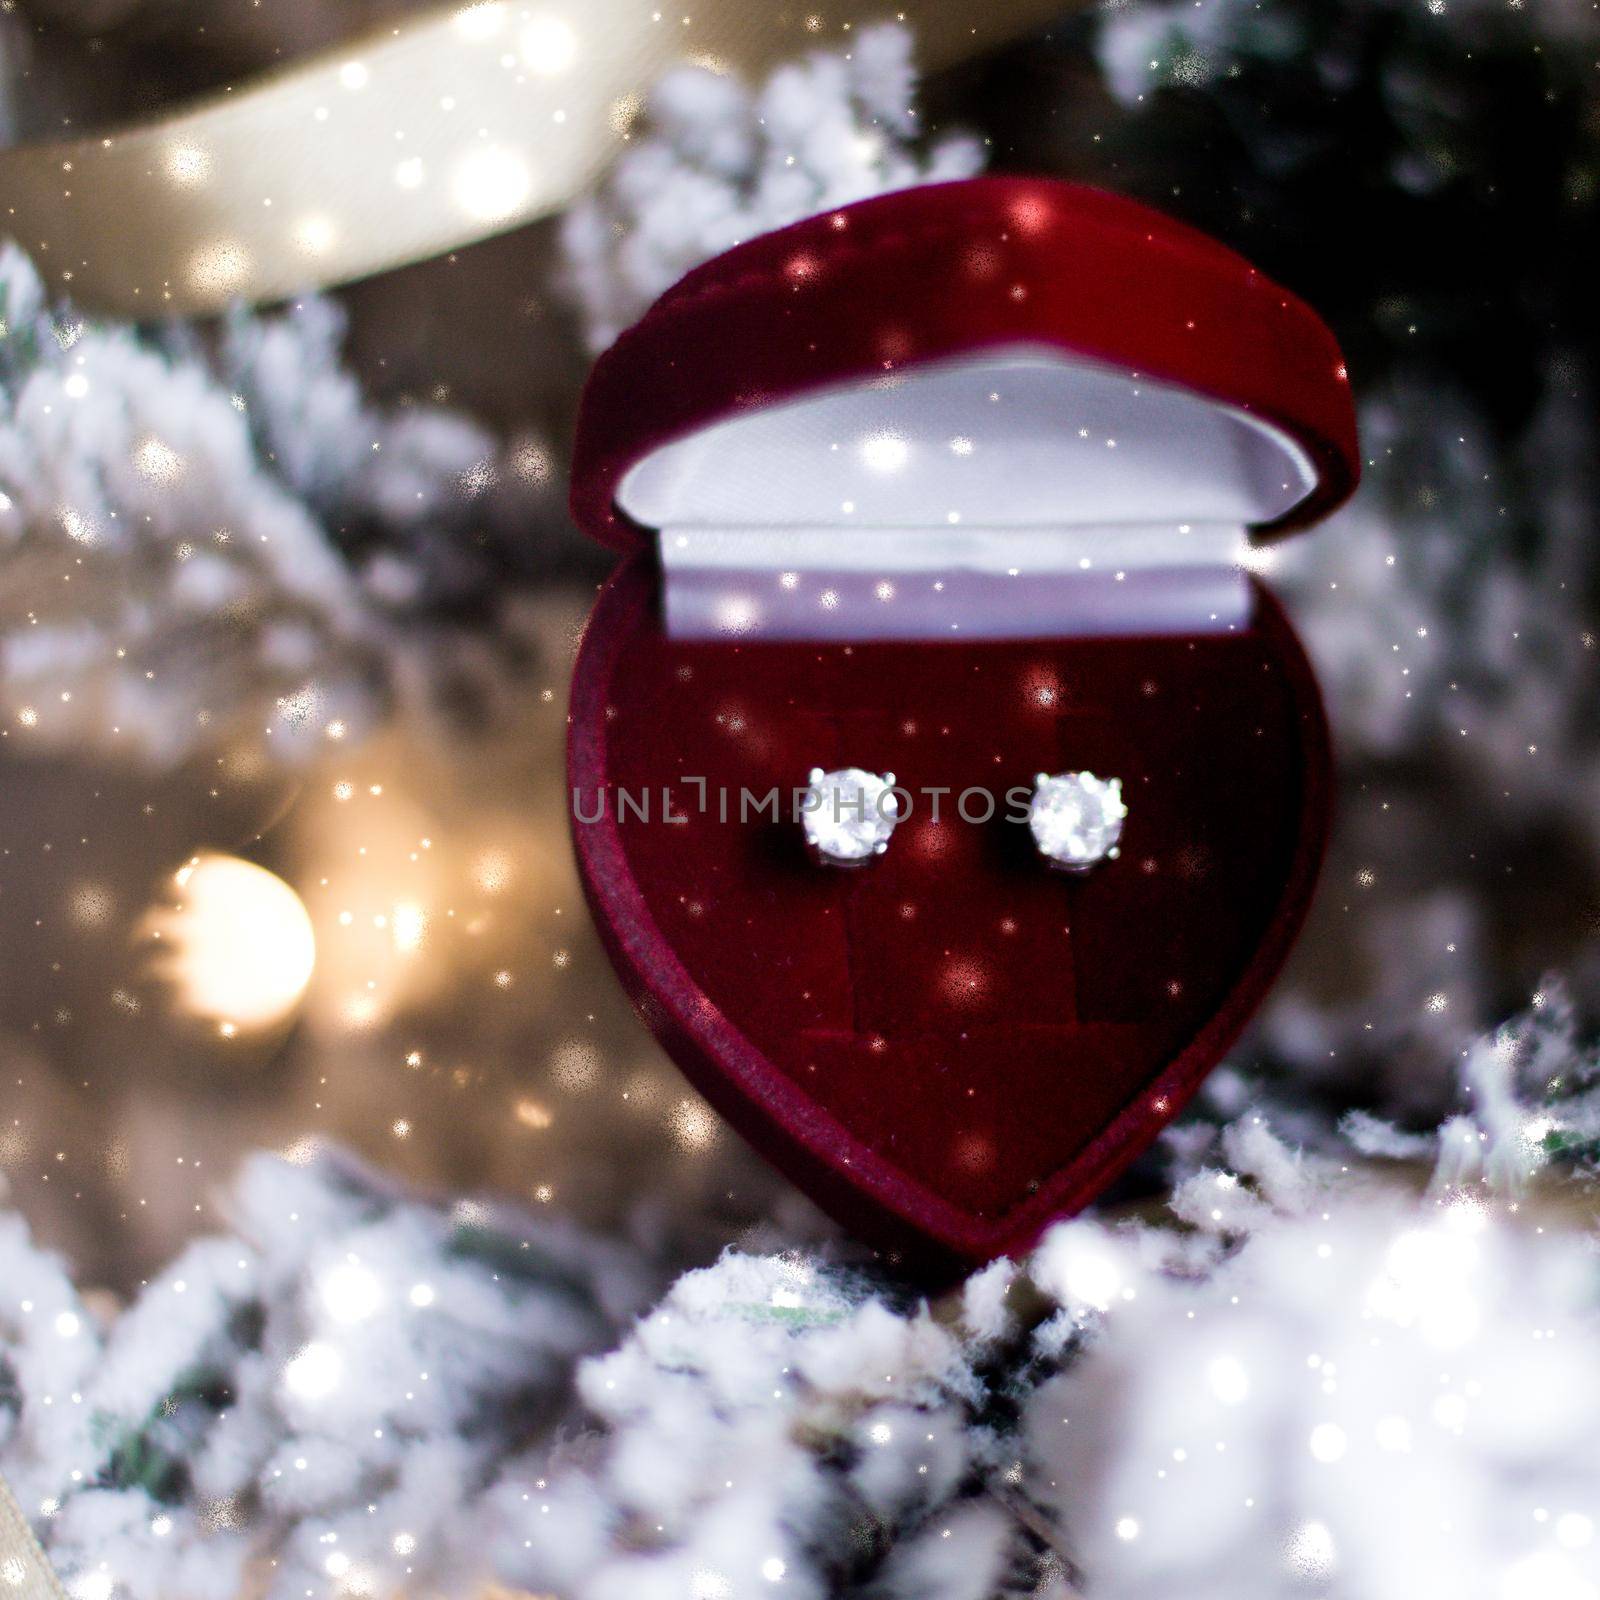 Timeless luxury, romantic proposal and happy celebration concept - Diamond earrings in heart shaped jewellery gift box on Christmas tree, love present for New Years Eve, Valentines Day and winter holidays